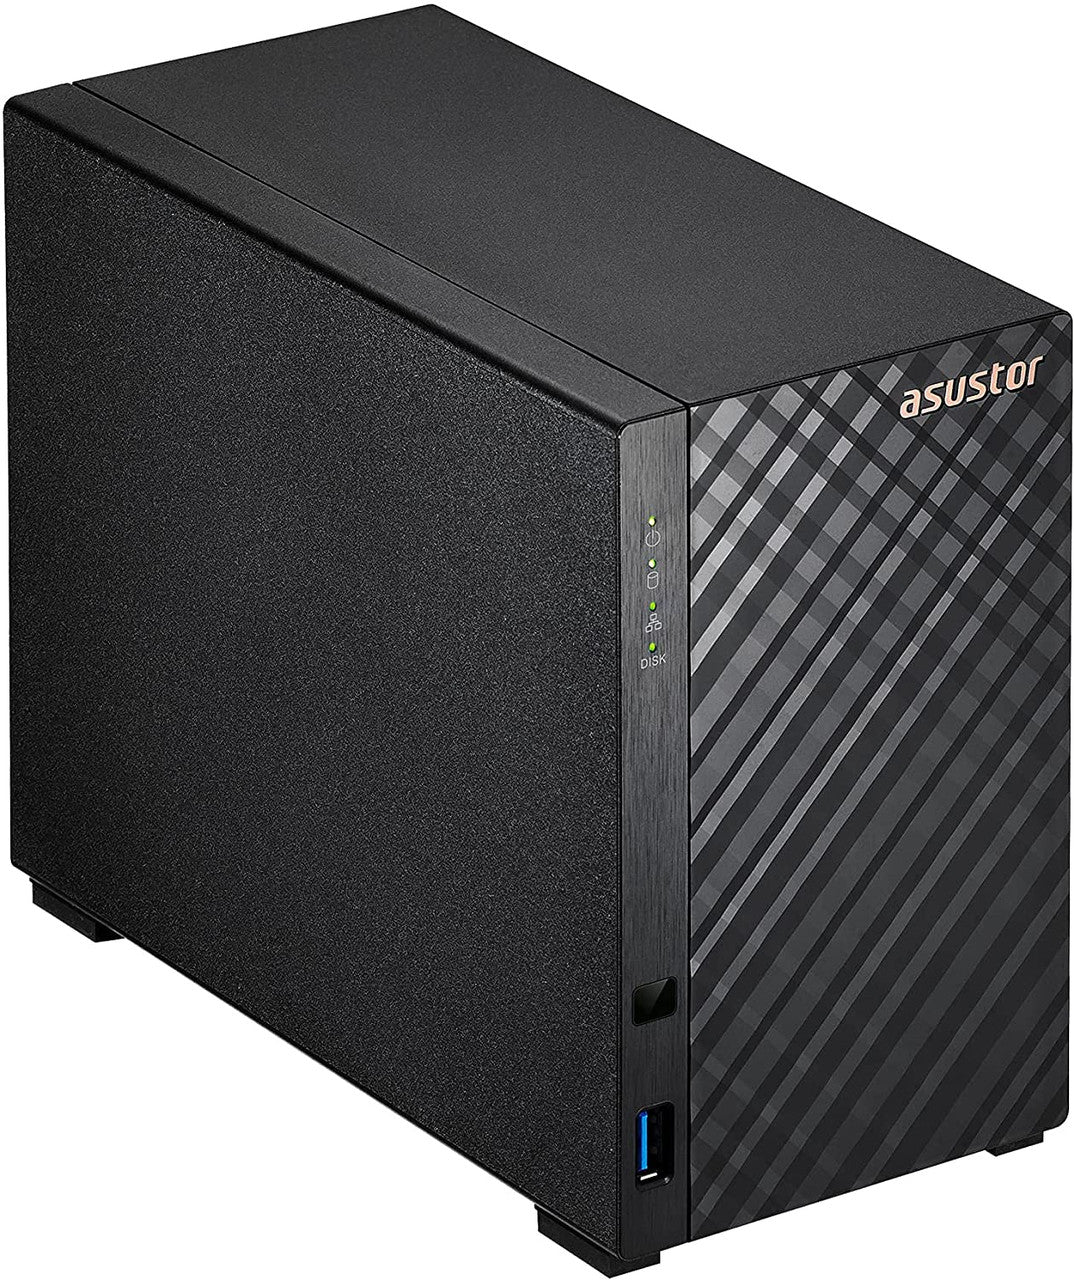 Asustor AS1102T 2-Bay Drivestor 2 NAS with 1GB RAM and 4TB (2x2TB) Western Digital RED PRO Drives